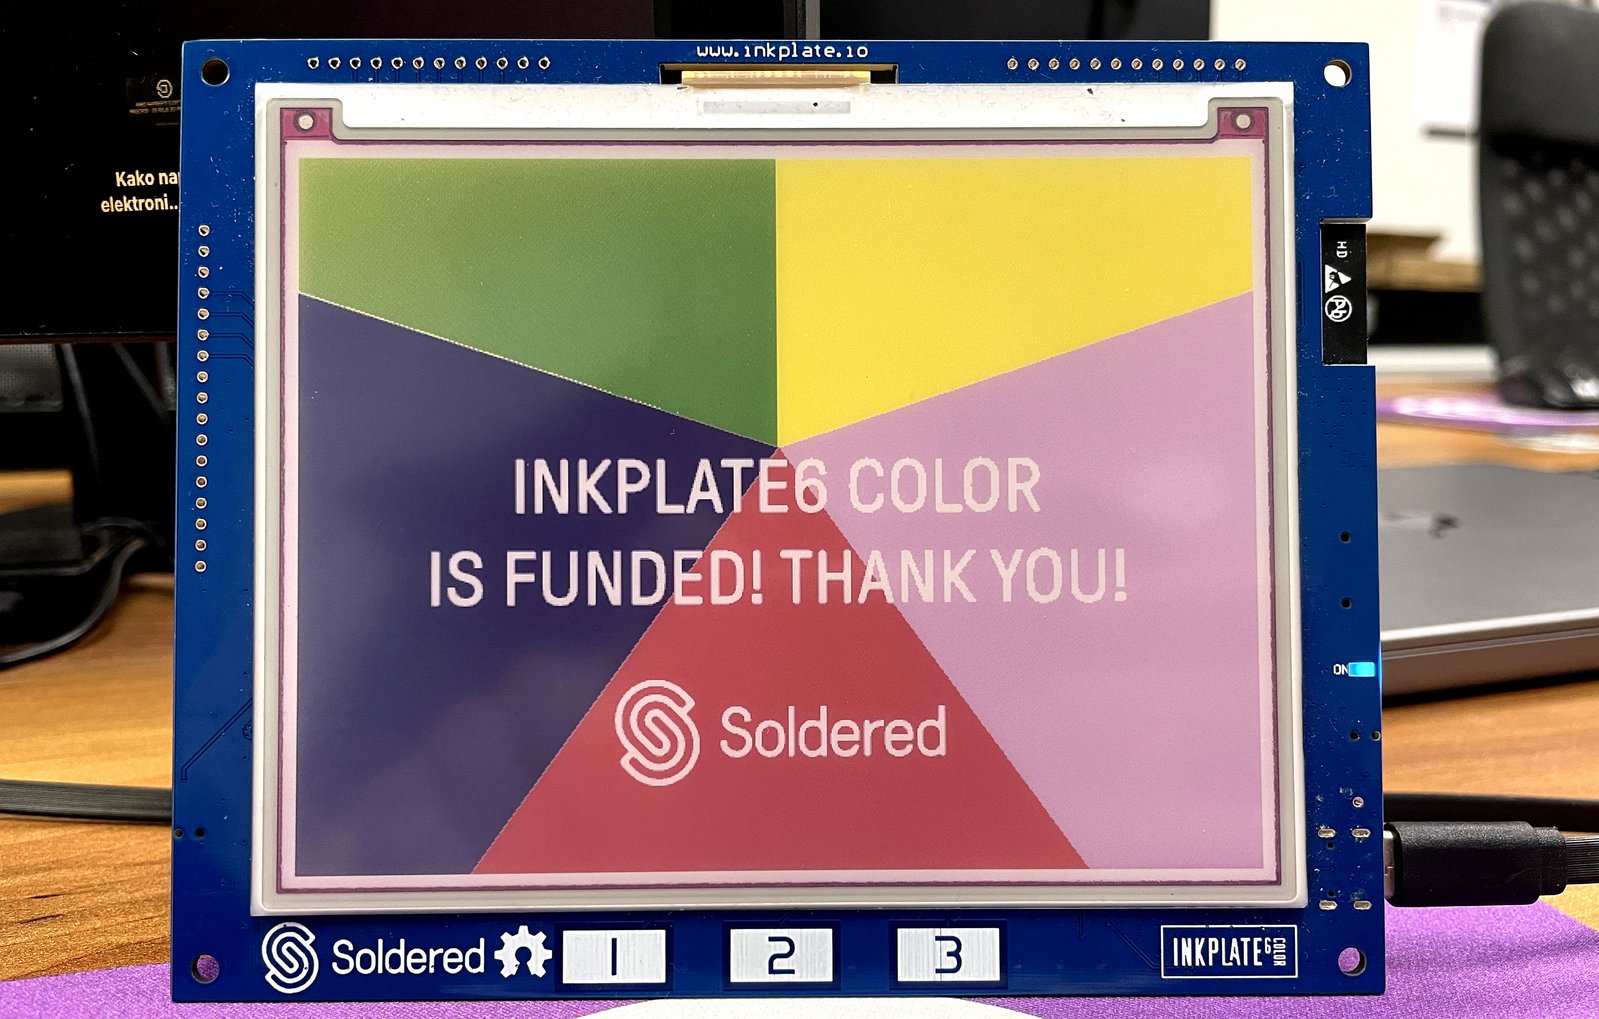 Screenshot: Inkplate 6COLOR is funded!